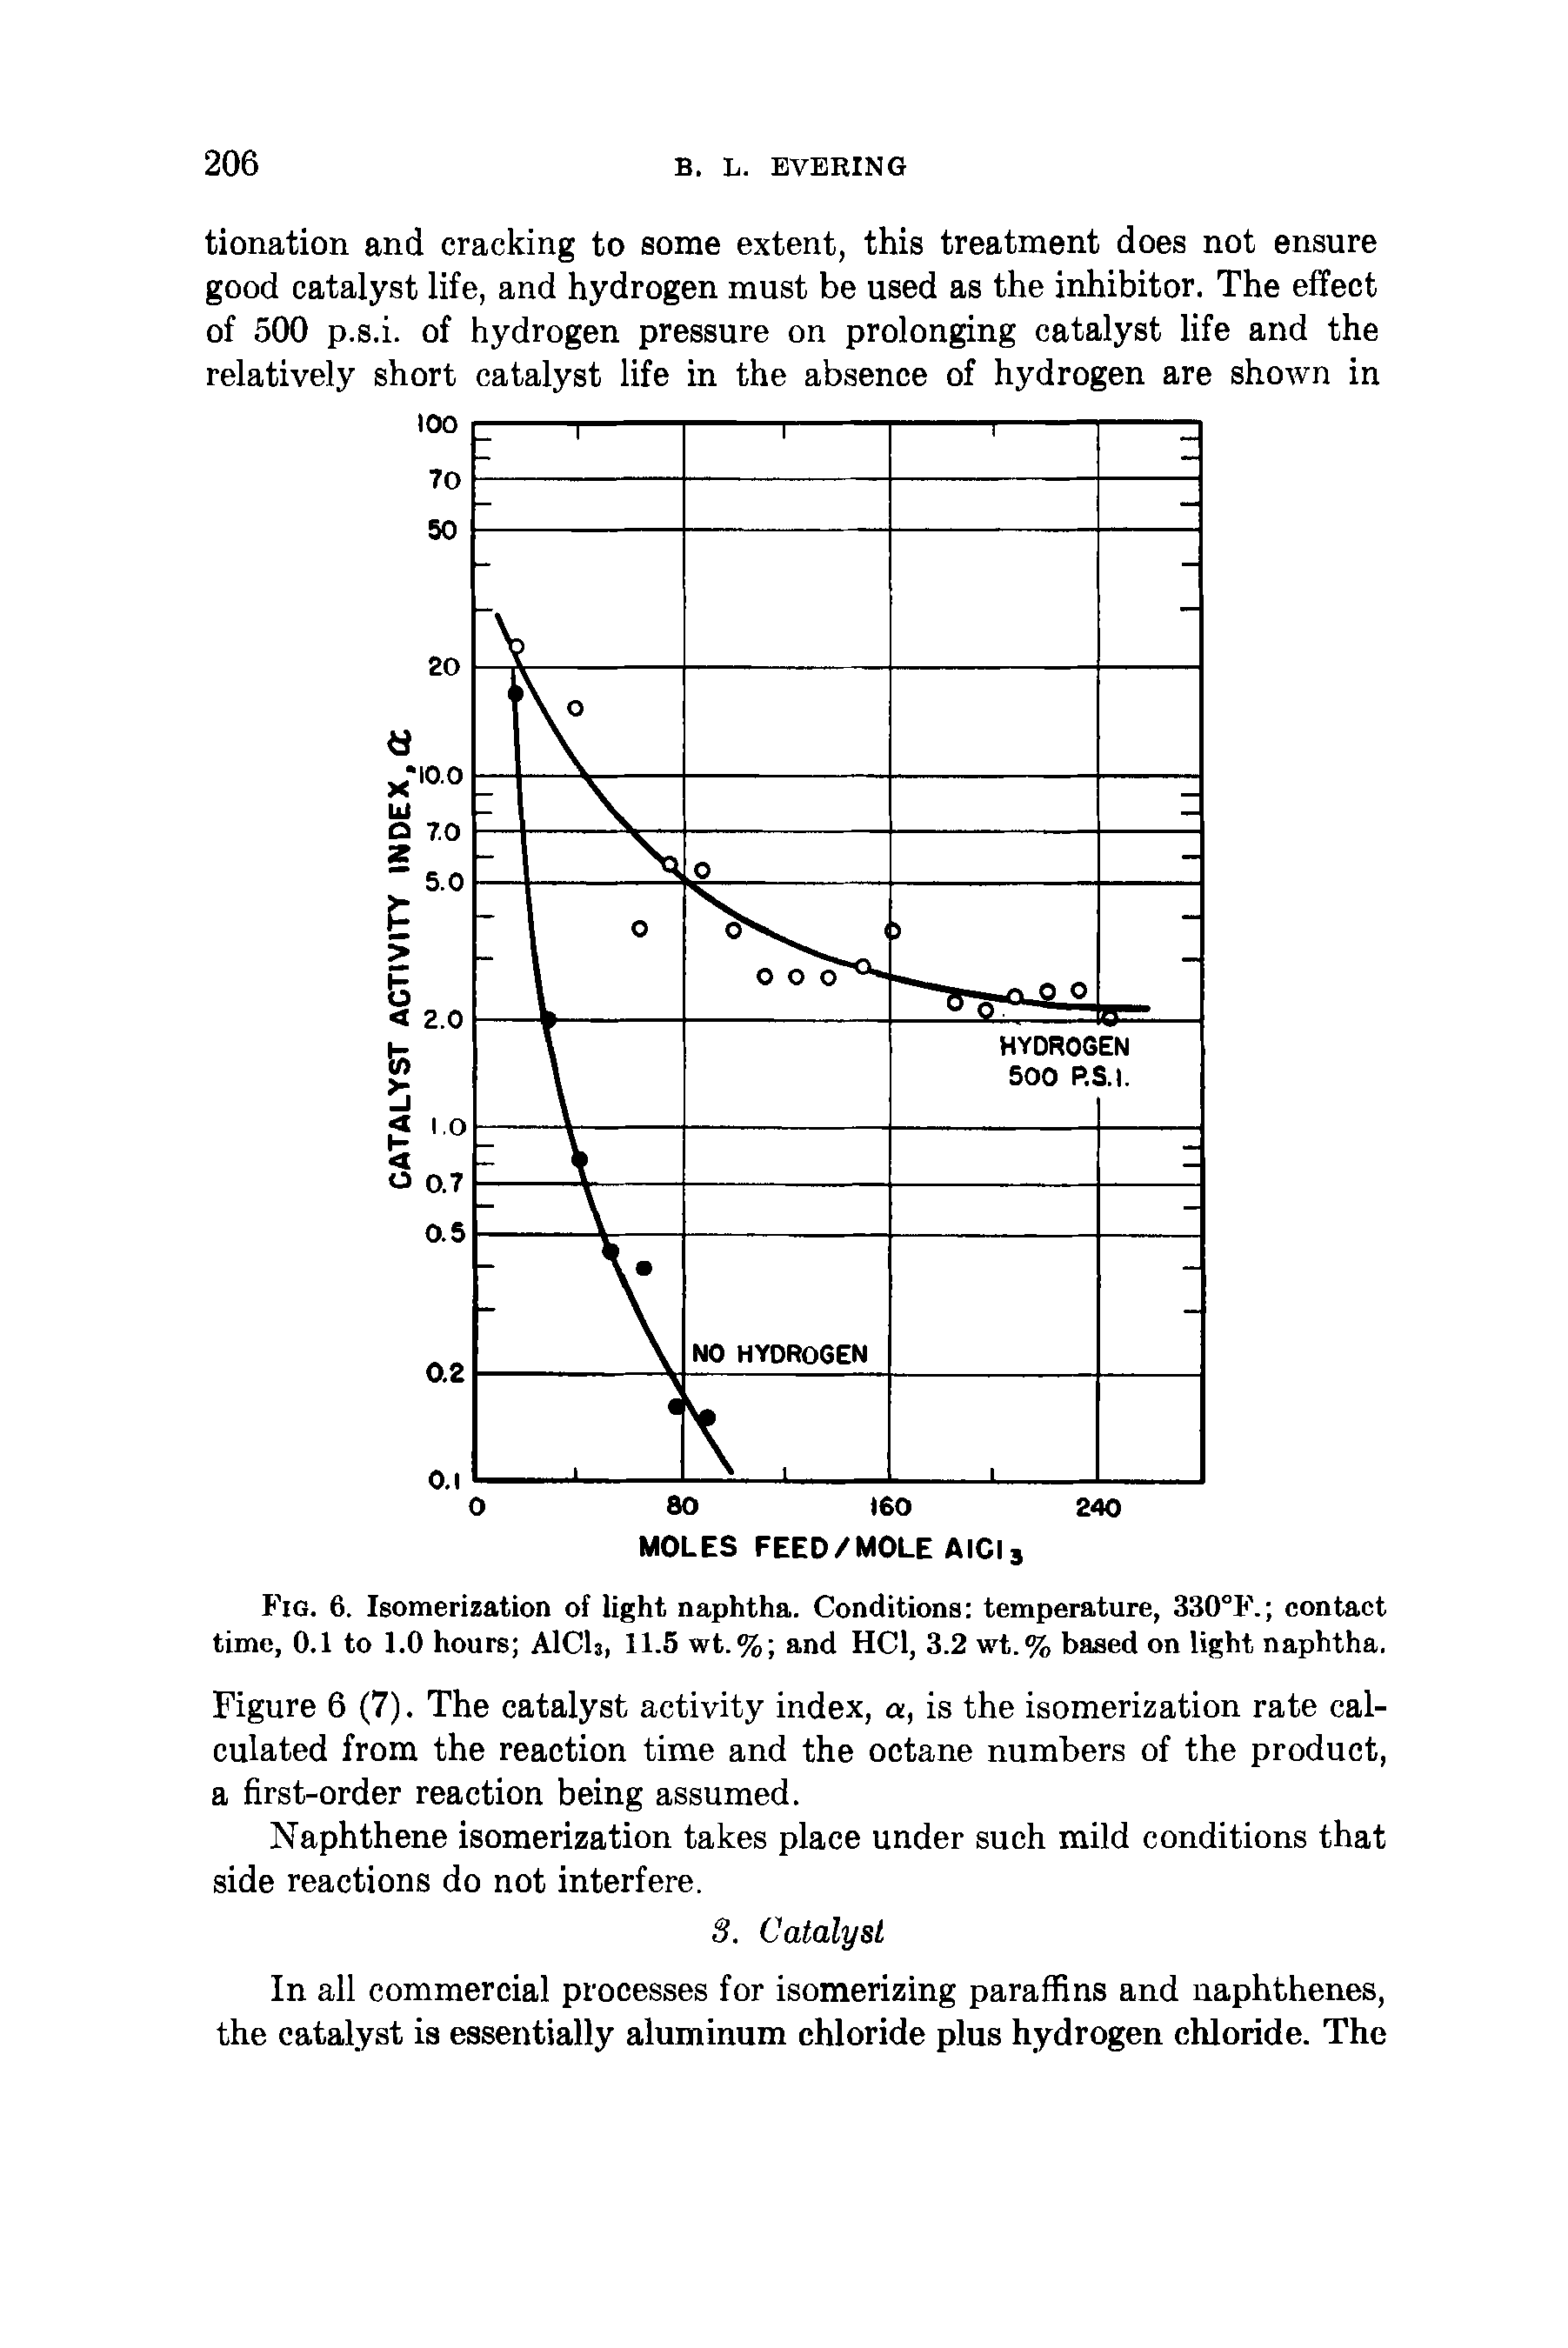 Figure 6 (7). The catalyst activity index, a, is the isomerization rate calculated from the reaction time and the octane numbers of the product, a first-order reaction being assumed.